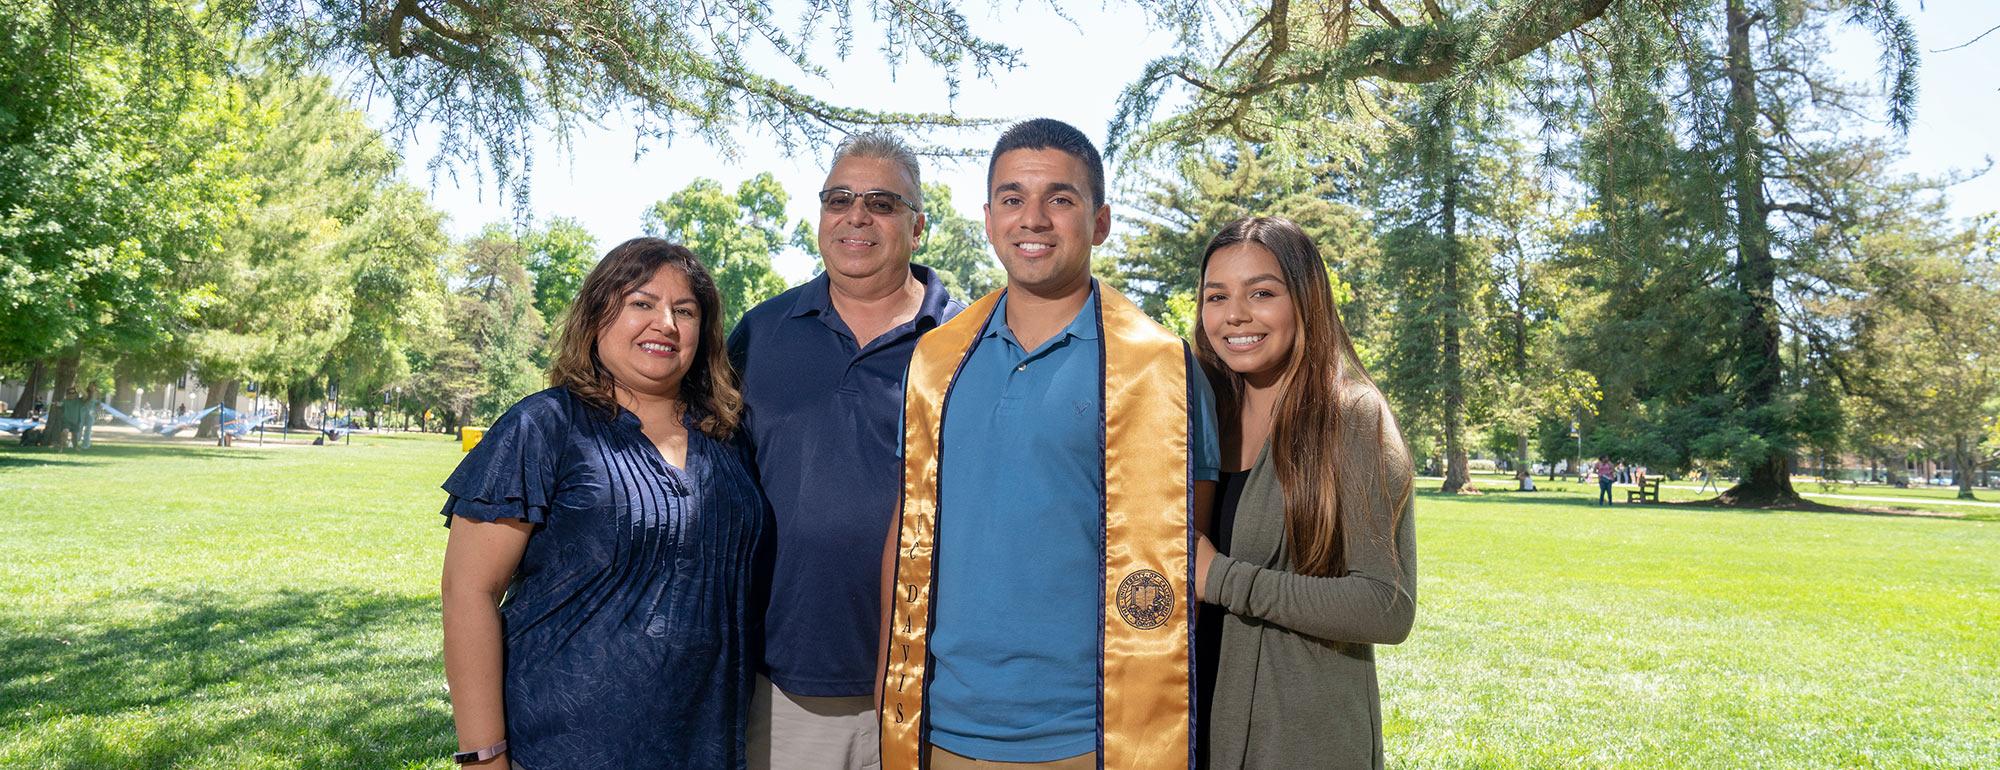 Parents pose with their TV graduate son on the quad 